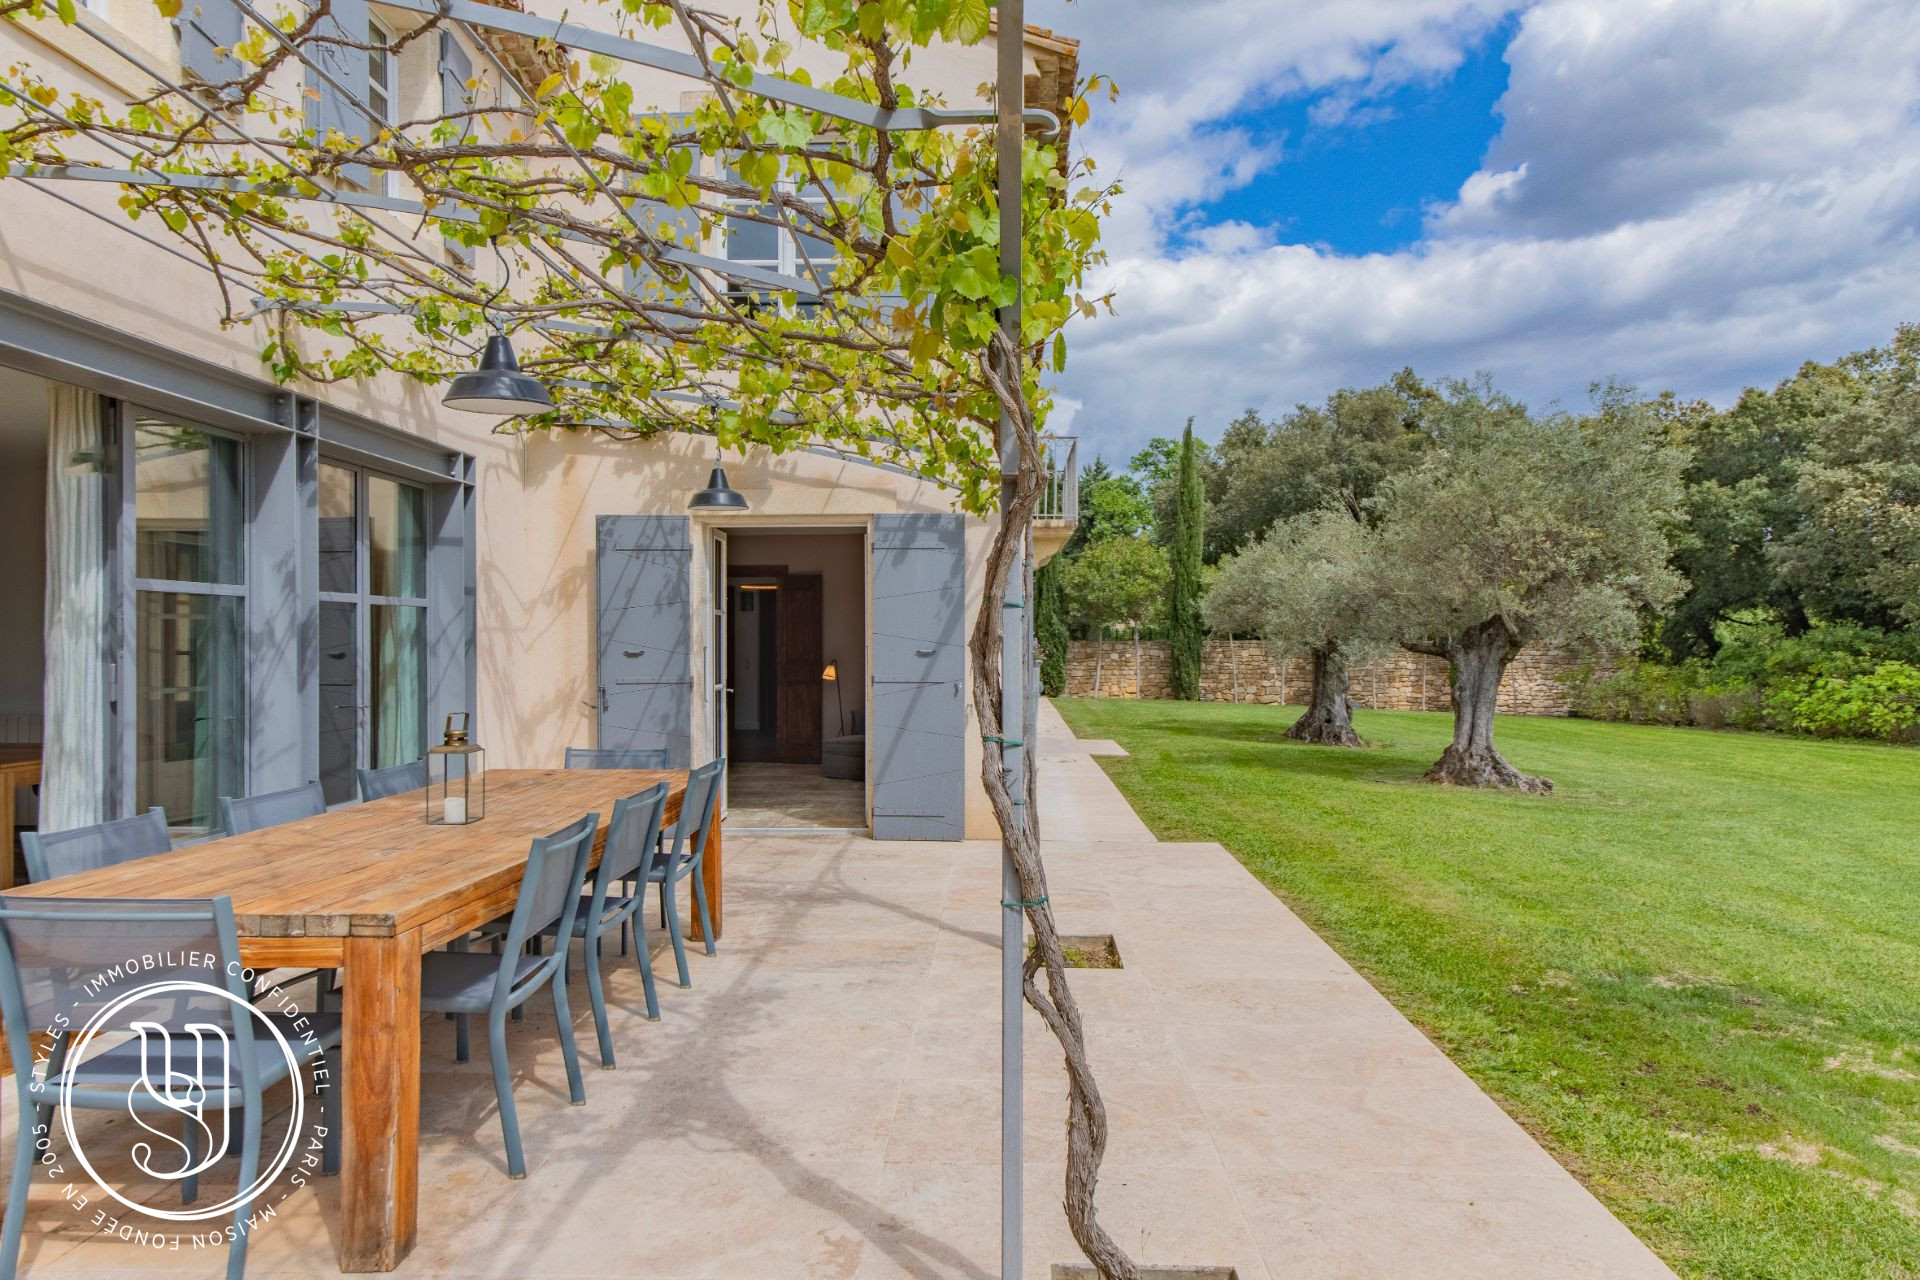 Uzès - nearby - an old house with perfect renovation, in the greenery - image 10